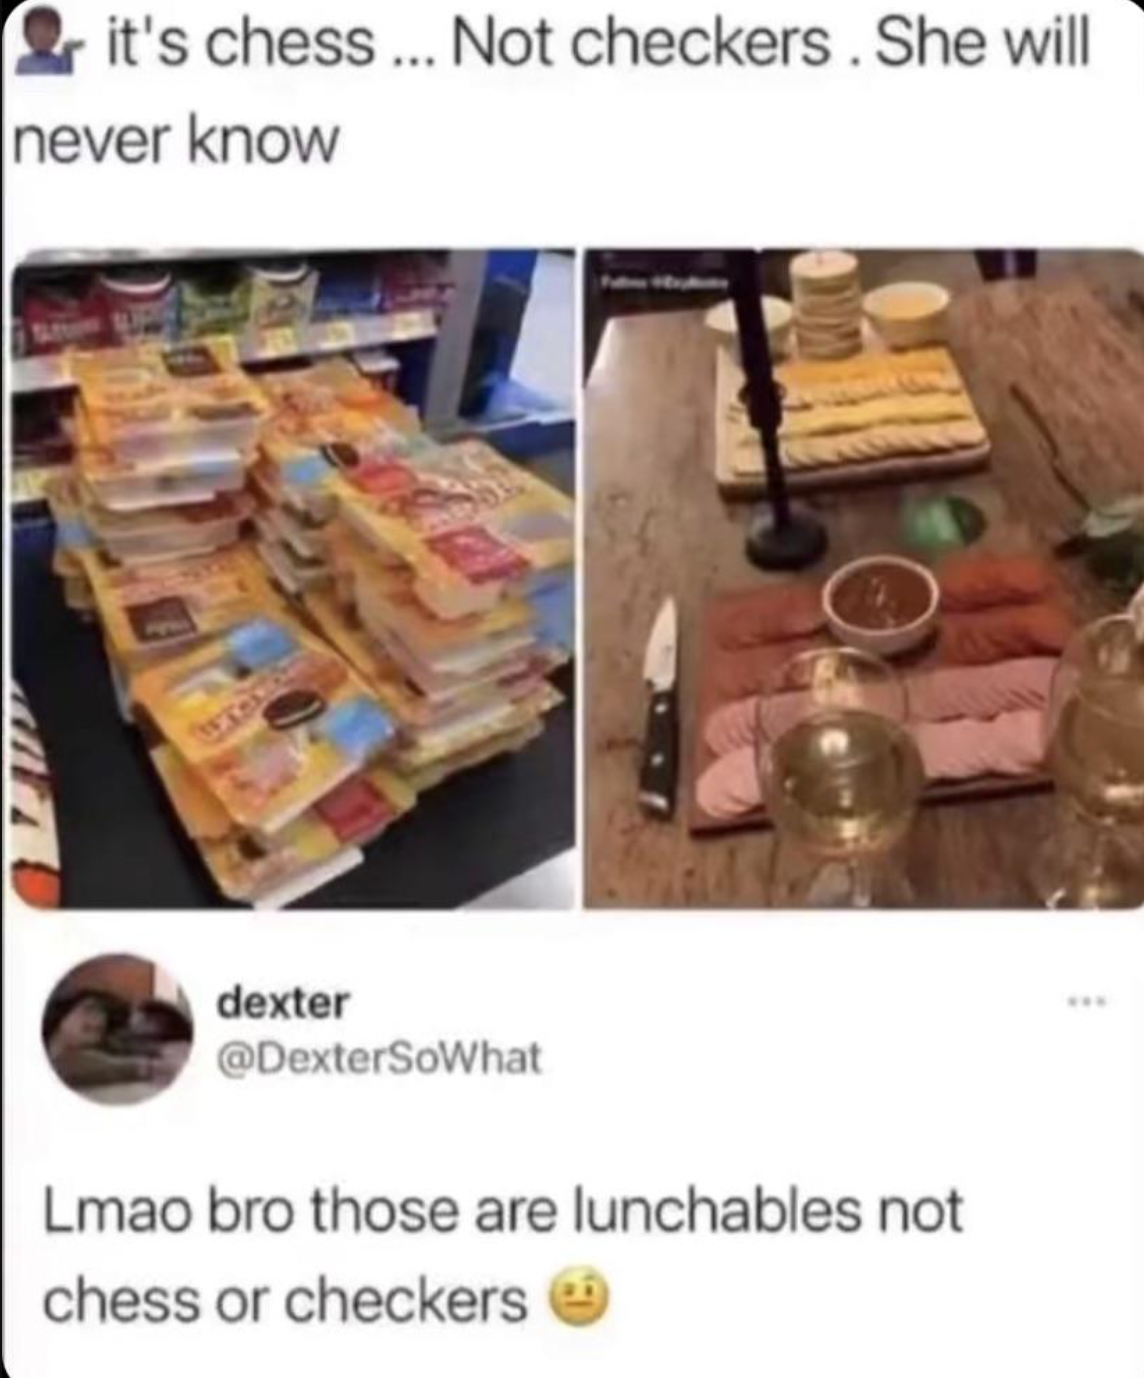 People Who Don't Get the Joke - lunchables memes - it's chess... Not checkers. She will never know